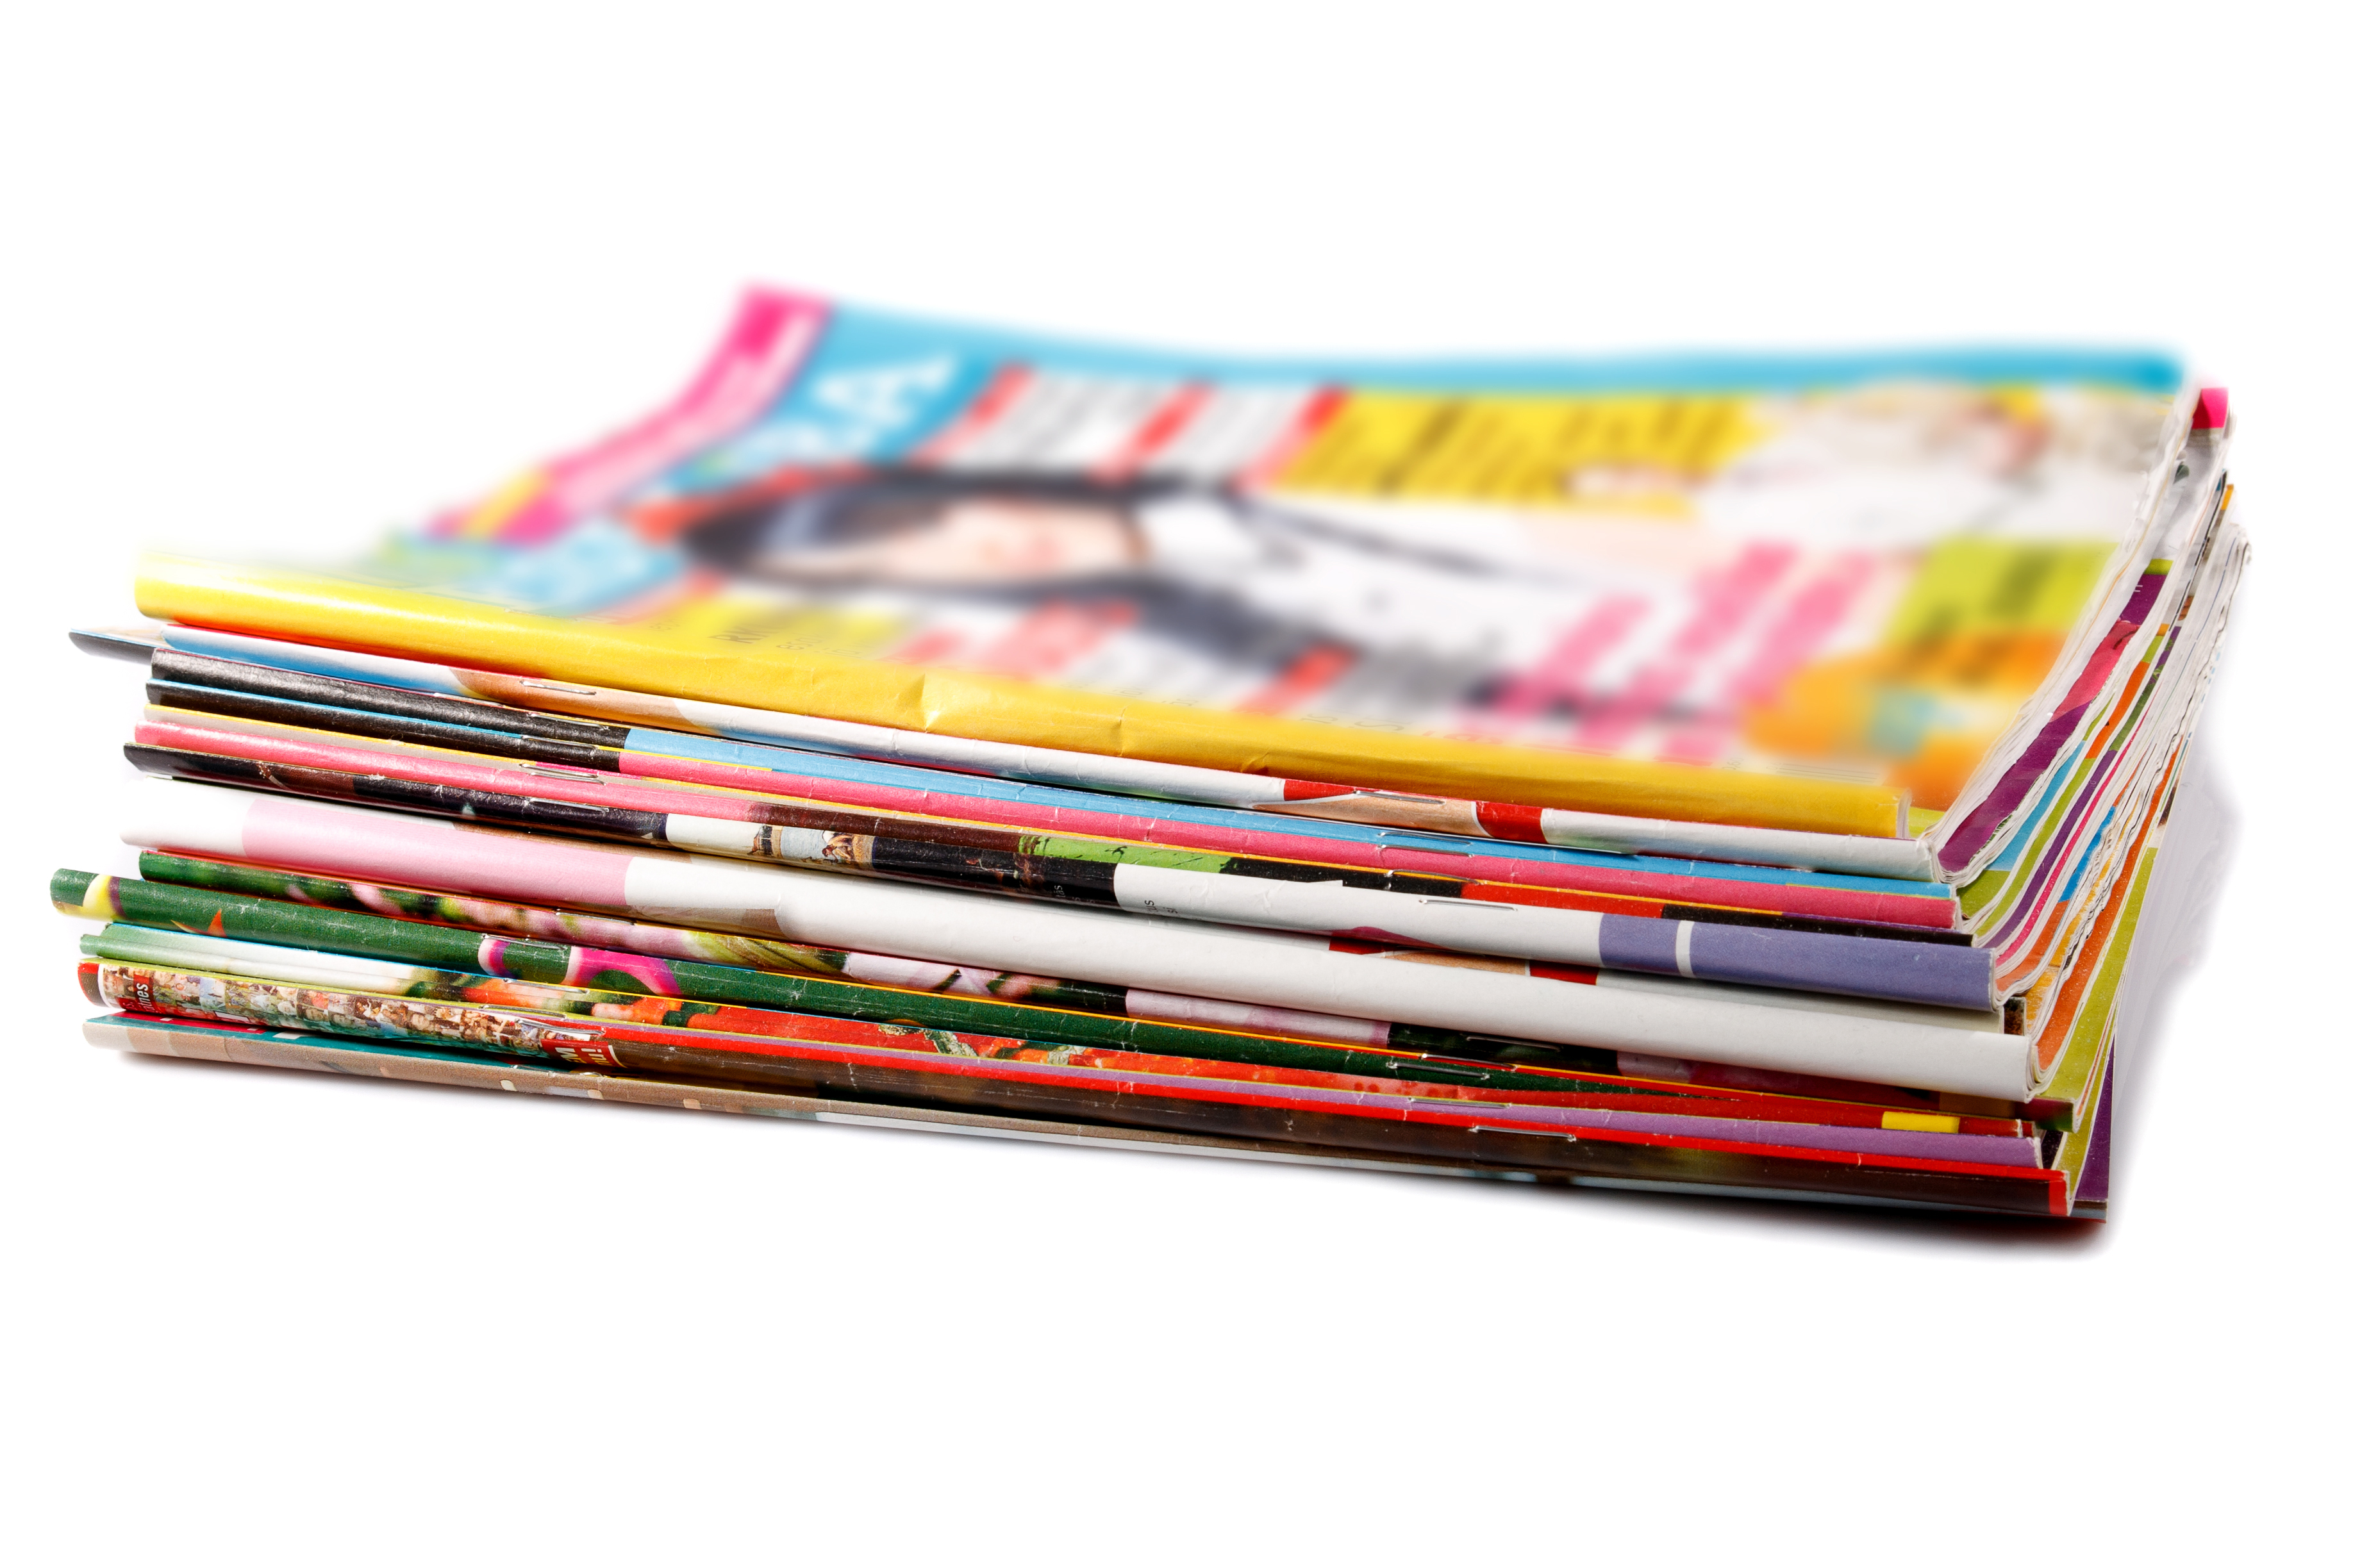 A stack of used magazines | Source: Shutterstock